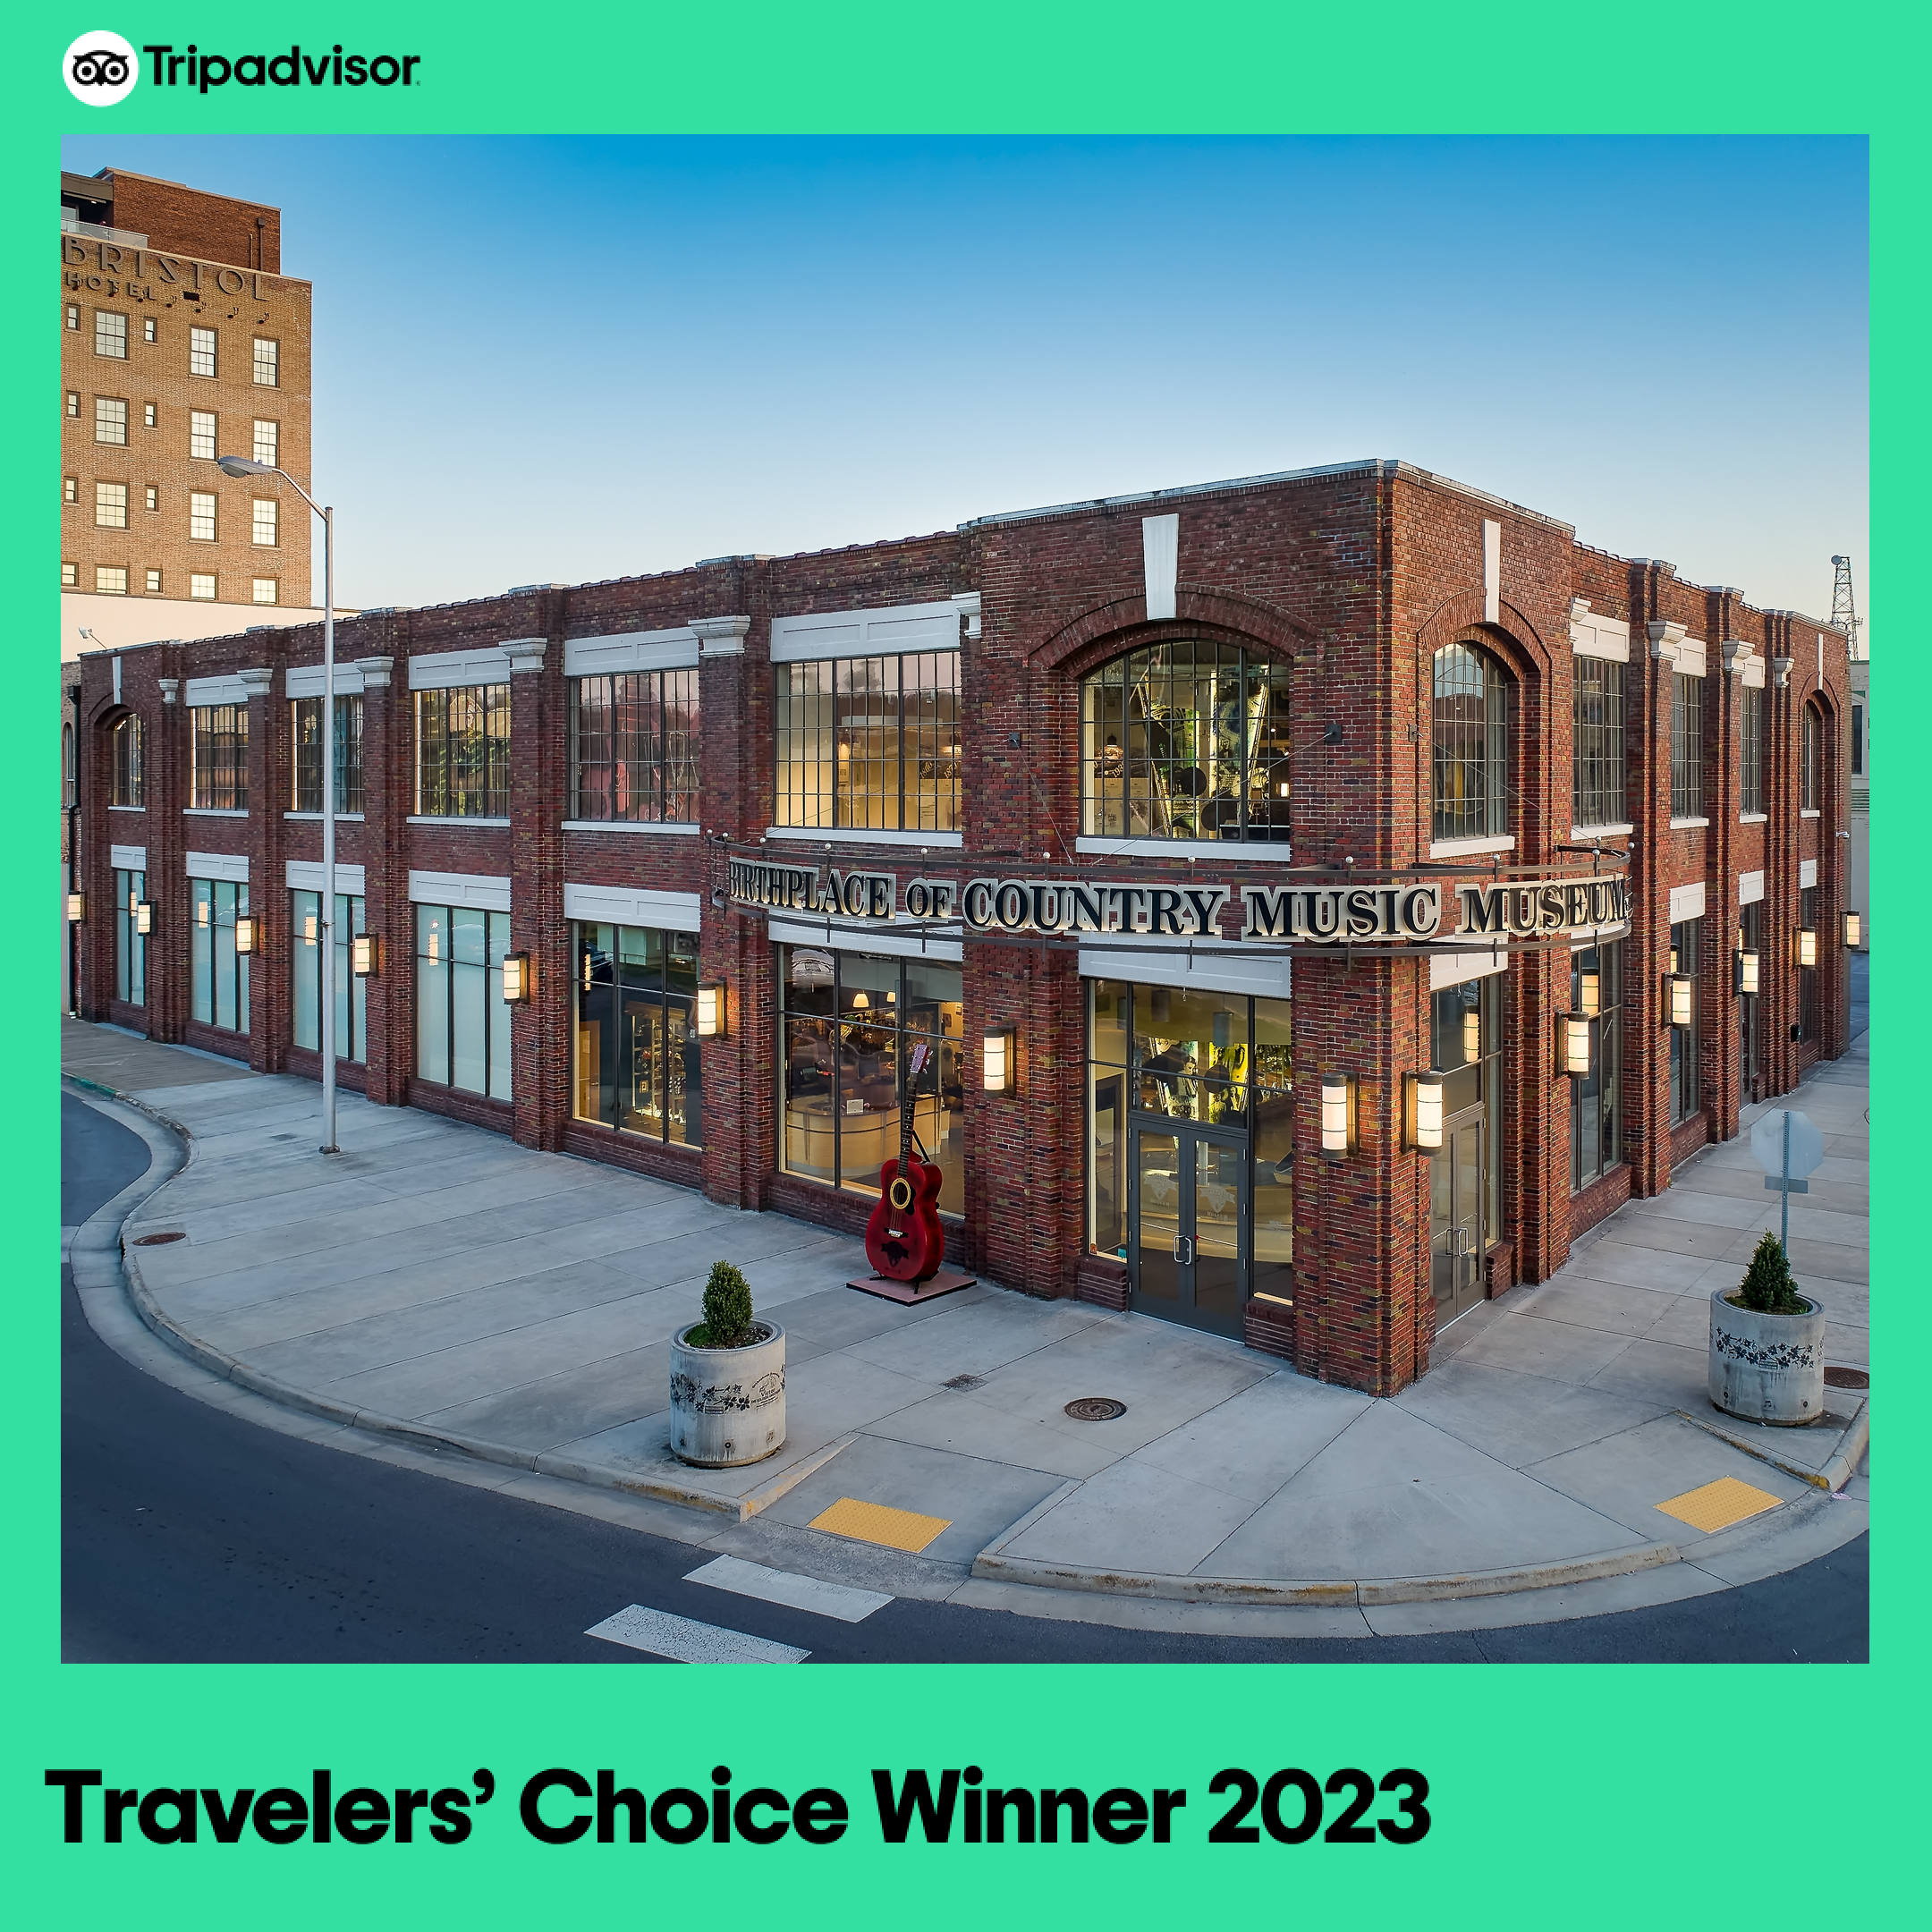 Photo of the Birthplace of Country Music Museum with a banner at the bottom that reads "Travelers' Choice Winner 2023"